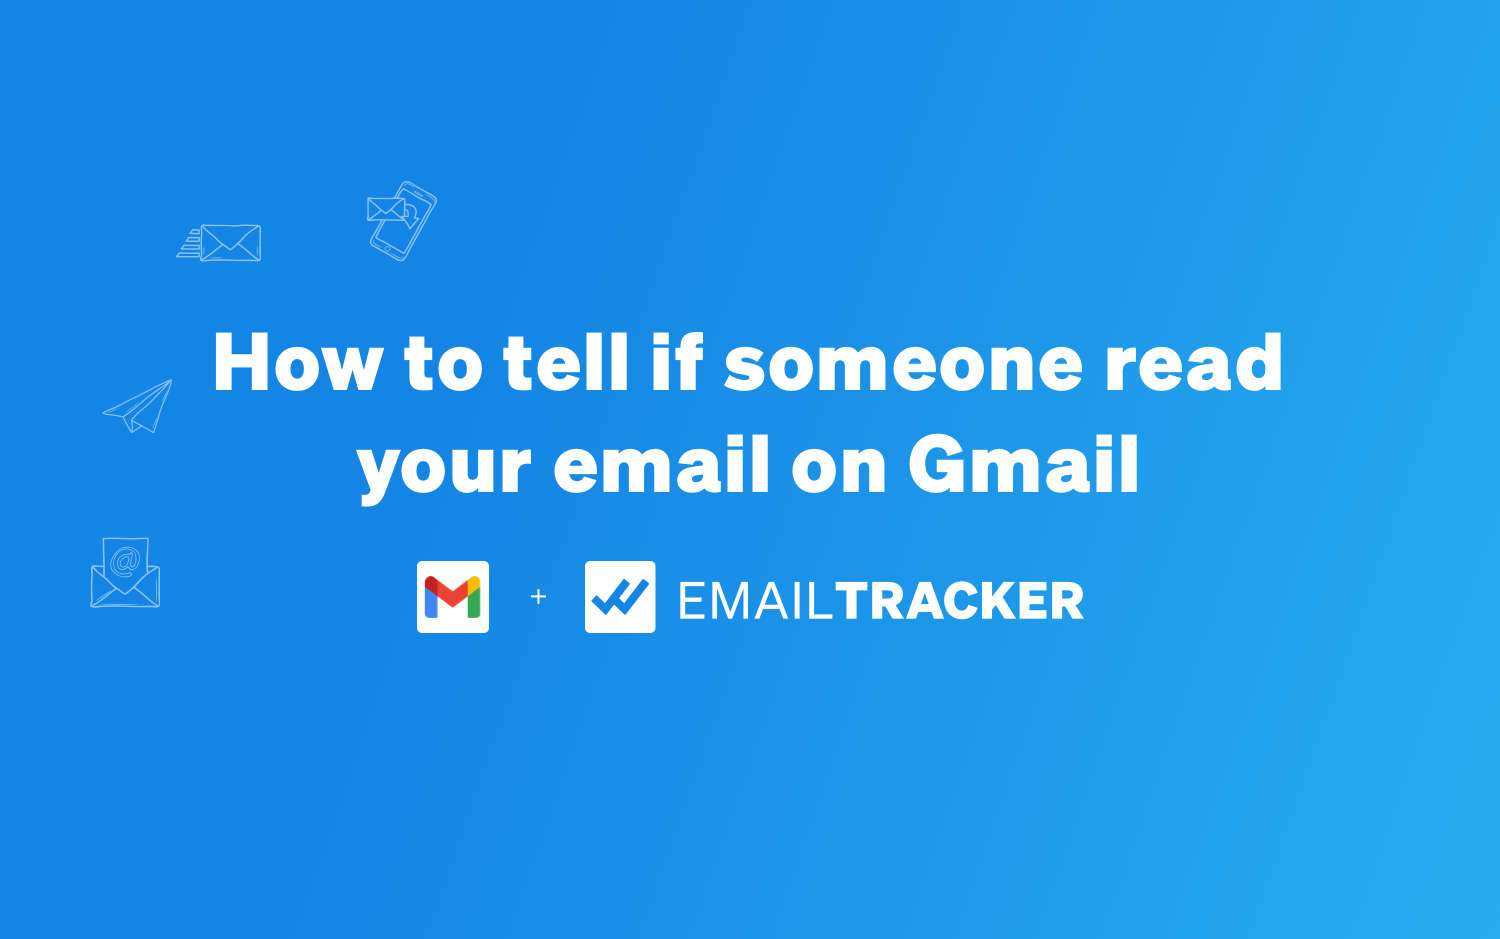 How To Tell If Someone Read Your Email On Gmail